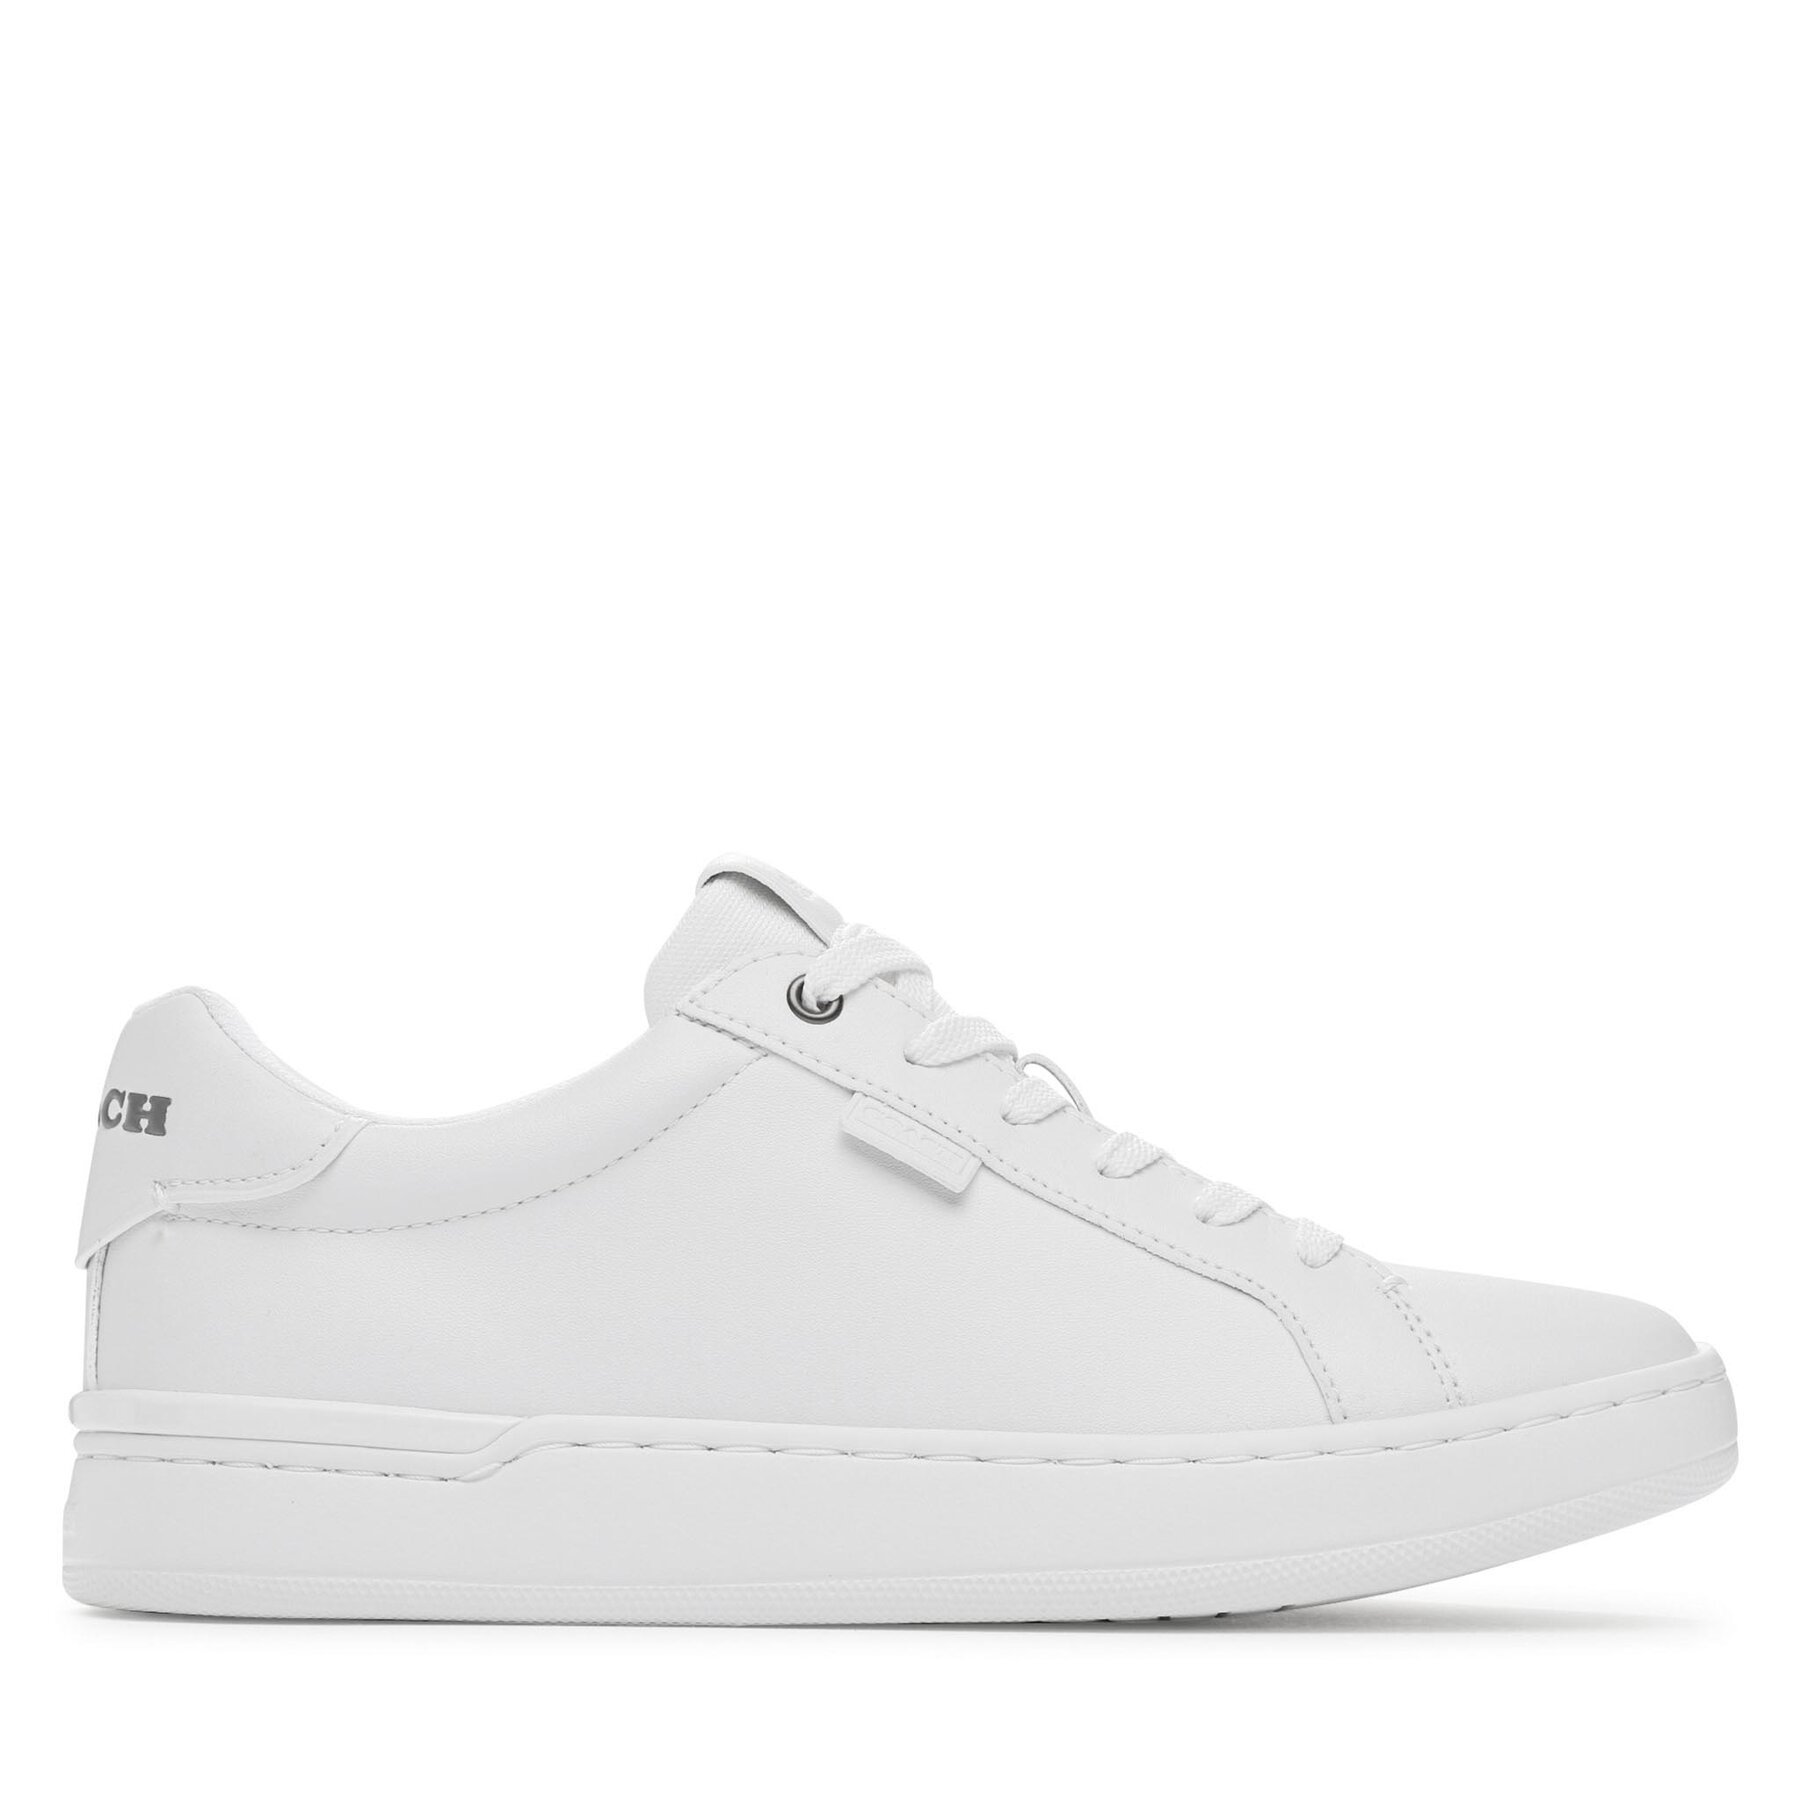 Sneakers Coach Lowline Leather CN577 Optic White OPI von Coach